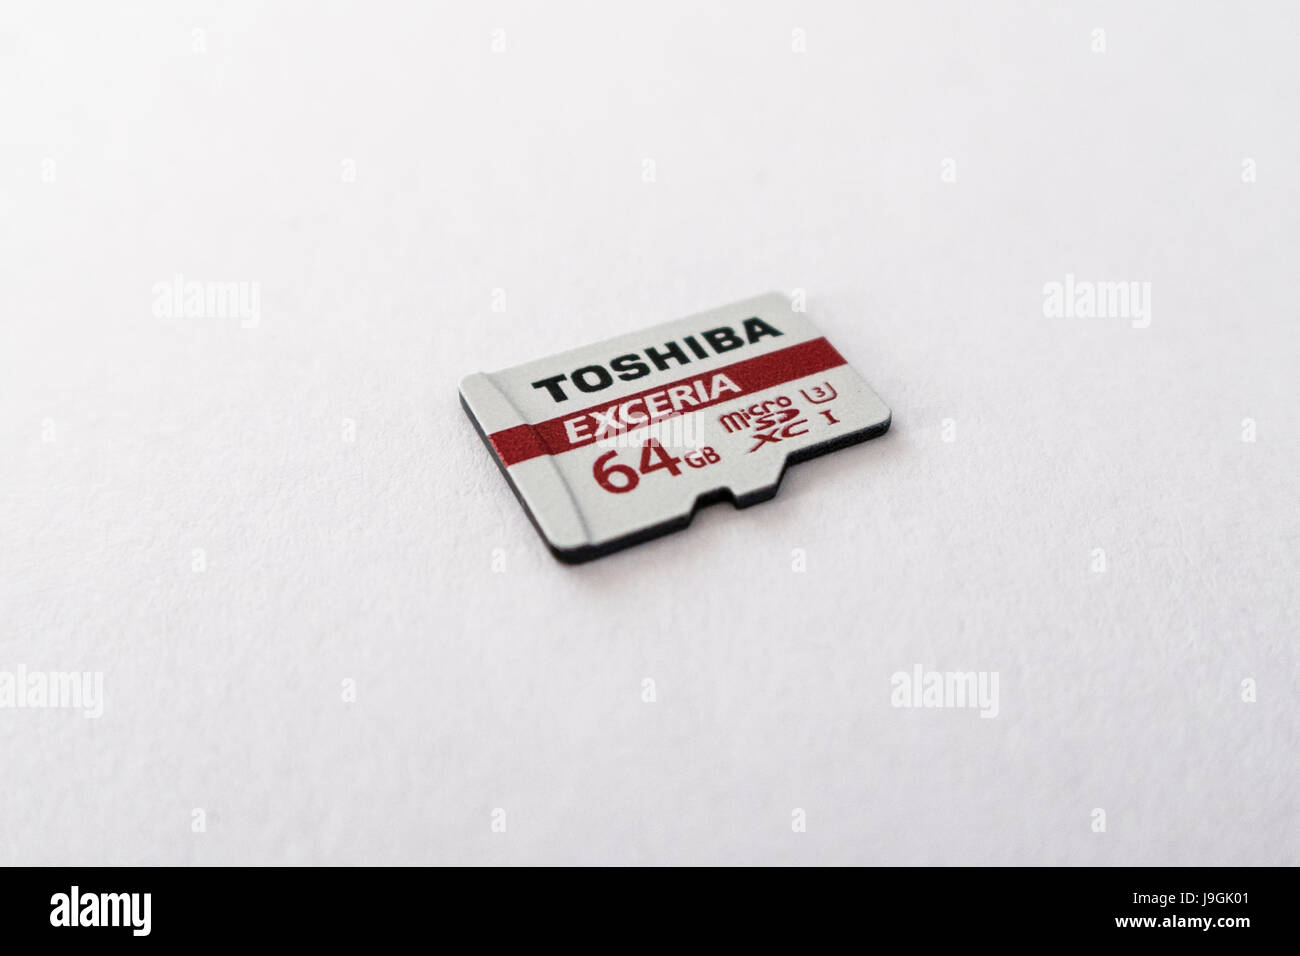 Toshiba Exceria microSD XC memory card with a capacity of 64GB on white background. Stock Photo